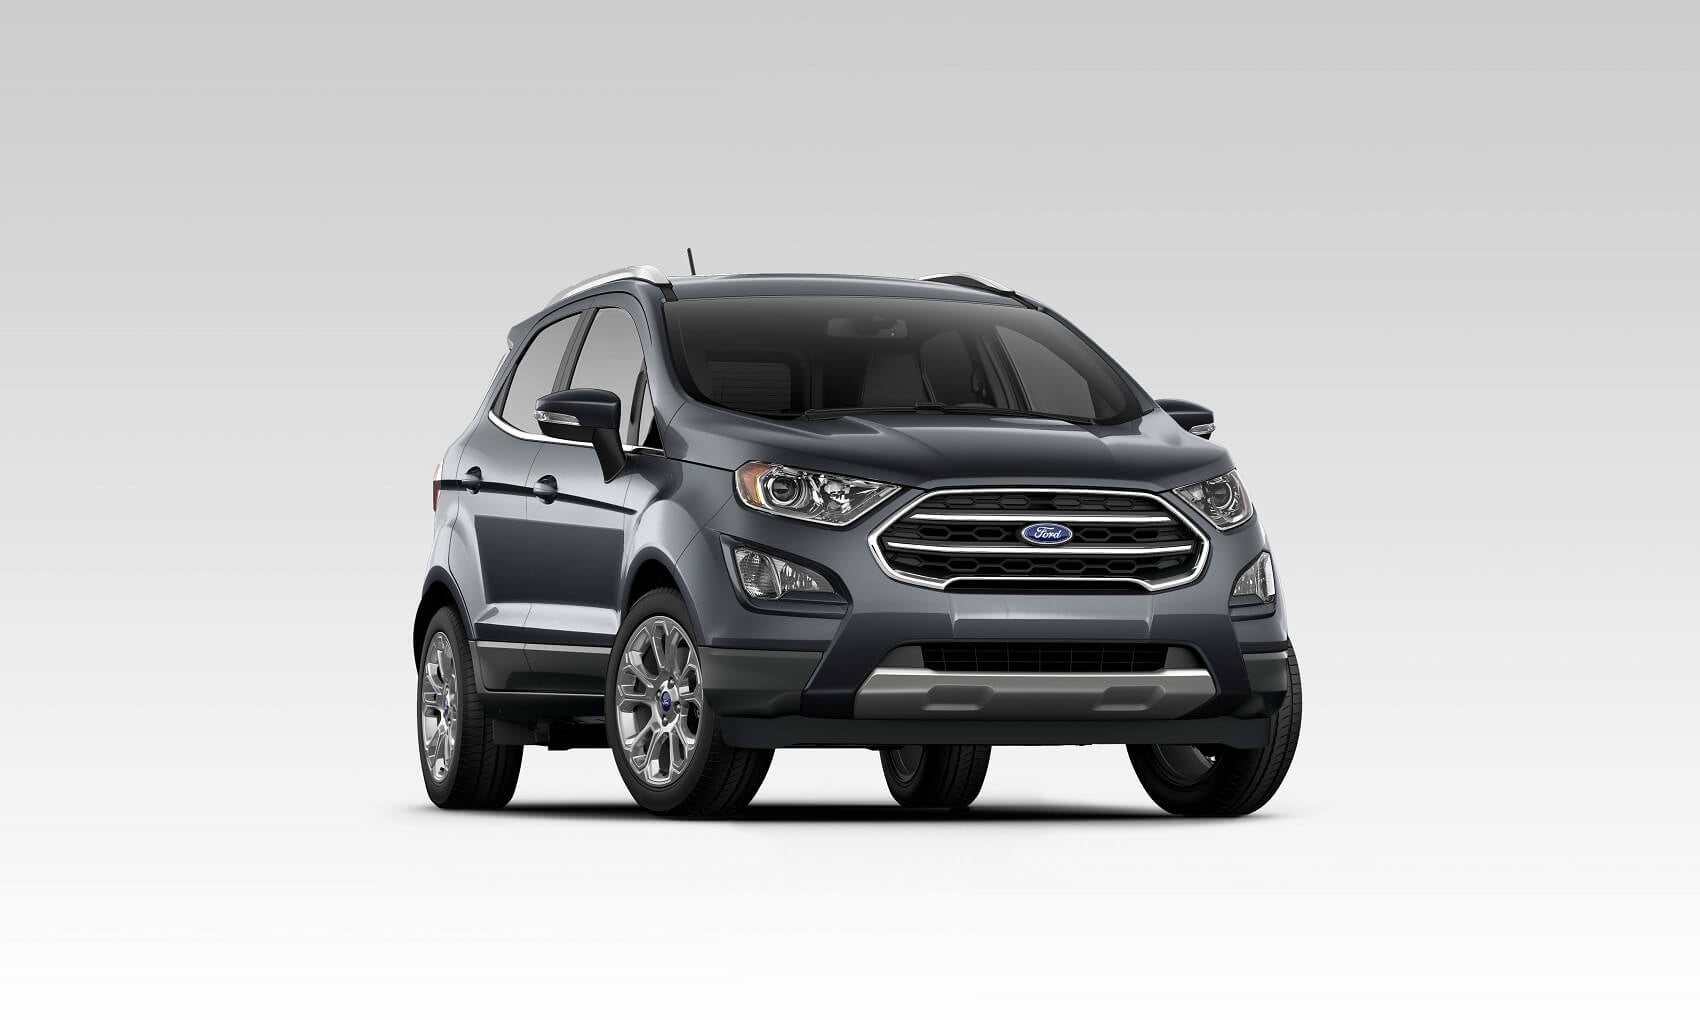 2021 Ford EcoSport Review Sumner WA